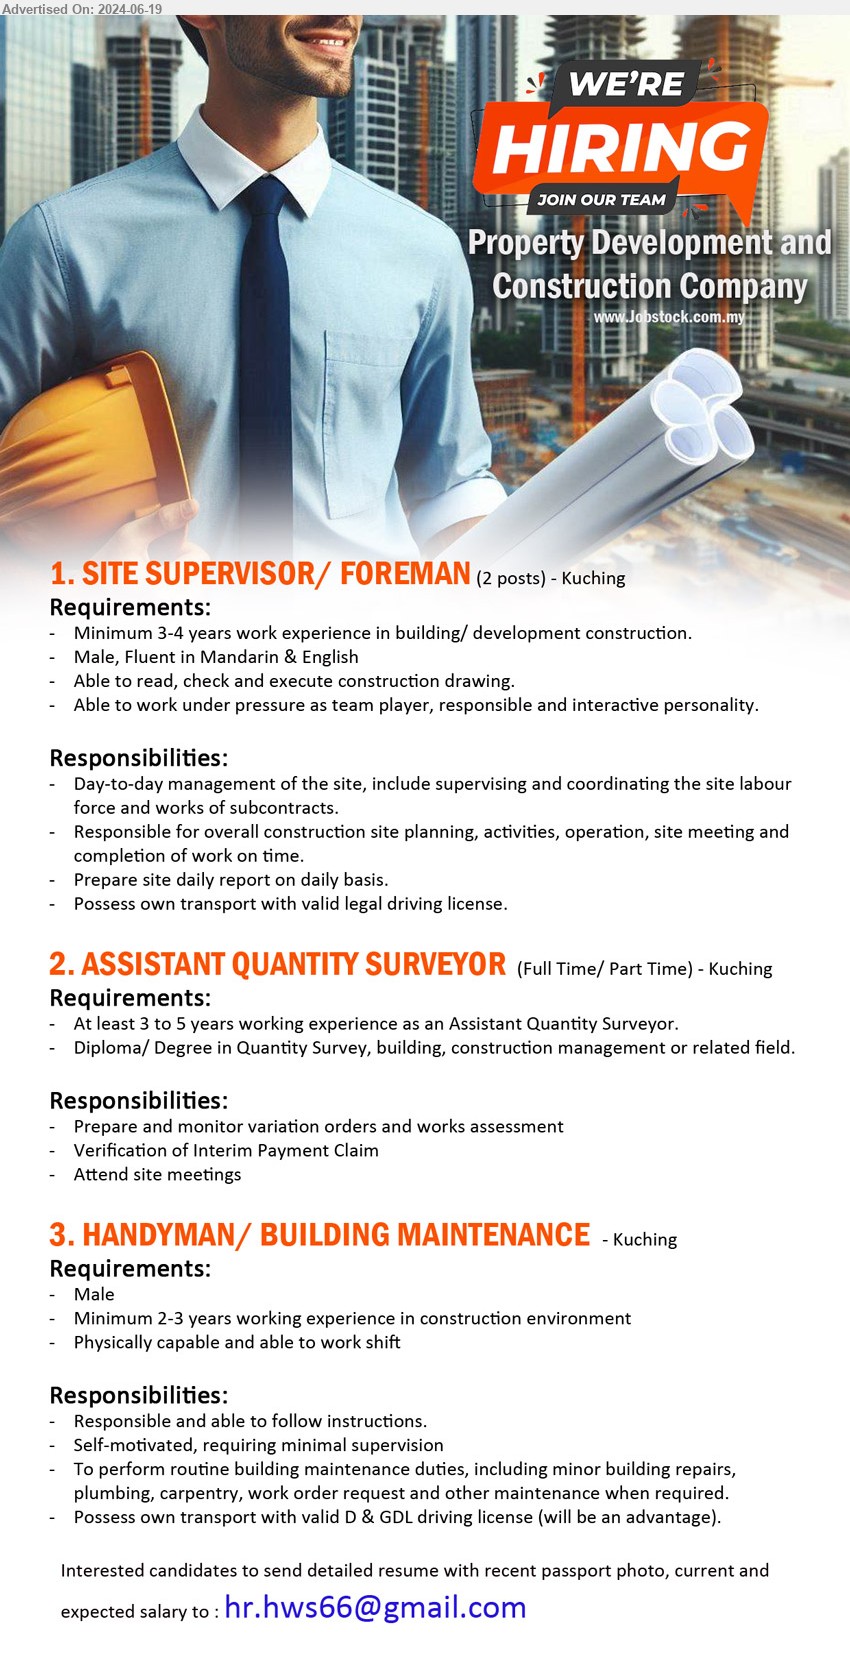 ADVERTISER (Property Development and Construction Company) - 1. SITE SUPERVISOR/ FOREMAN (Kuching), Minimum 3-4 years work experience in building/ development construction,...
2. ASSISTANT QUANTITY SURVEYOR (Kuching), Diploma/ Degree in Quantity Survey, building, construction management,...
3. HANDYMAN/ BUILDING MAINTENANCE (Kuching), Male, Minimum 2-3 years working experience in construction environment,...
Email resume to ...
